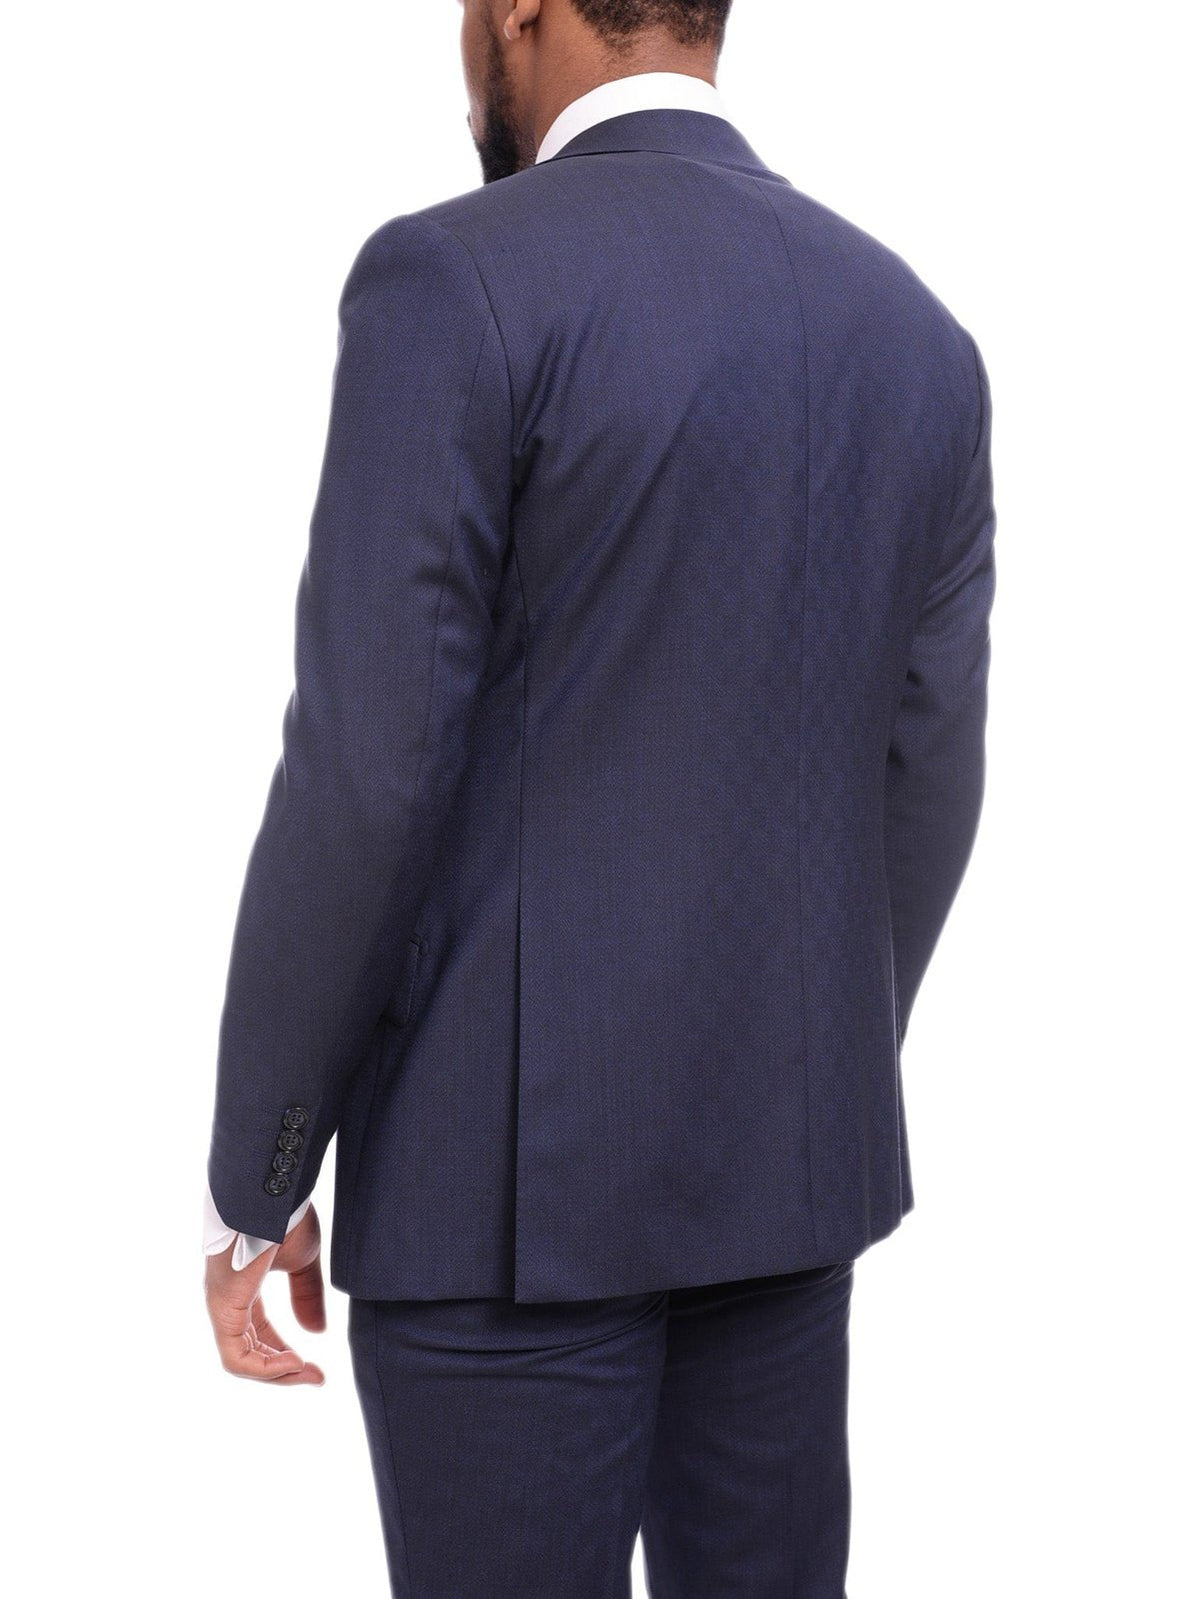 Napoli TWO PIECE SUITS Napoli Slim Fit Textured Navy Blue Half Canvassed Wool Suit Ticket Pocket